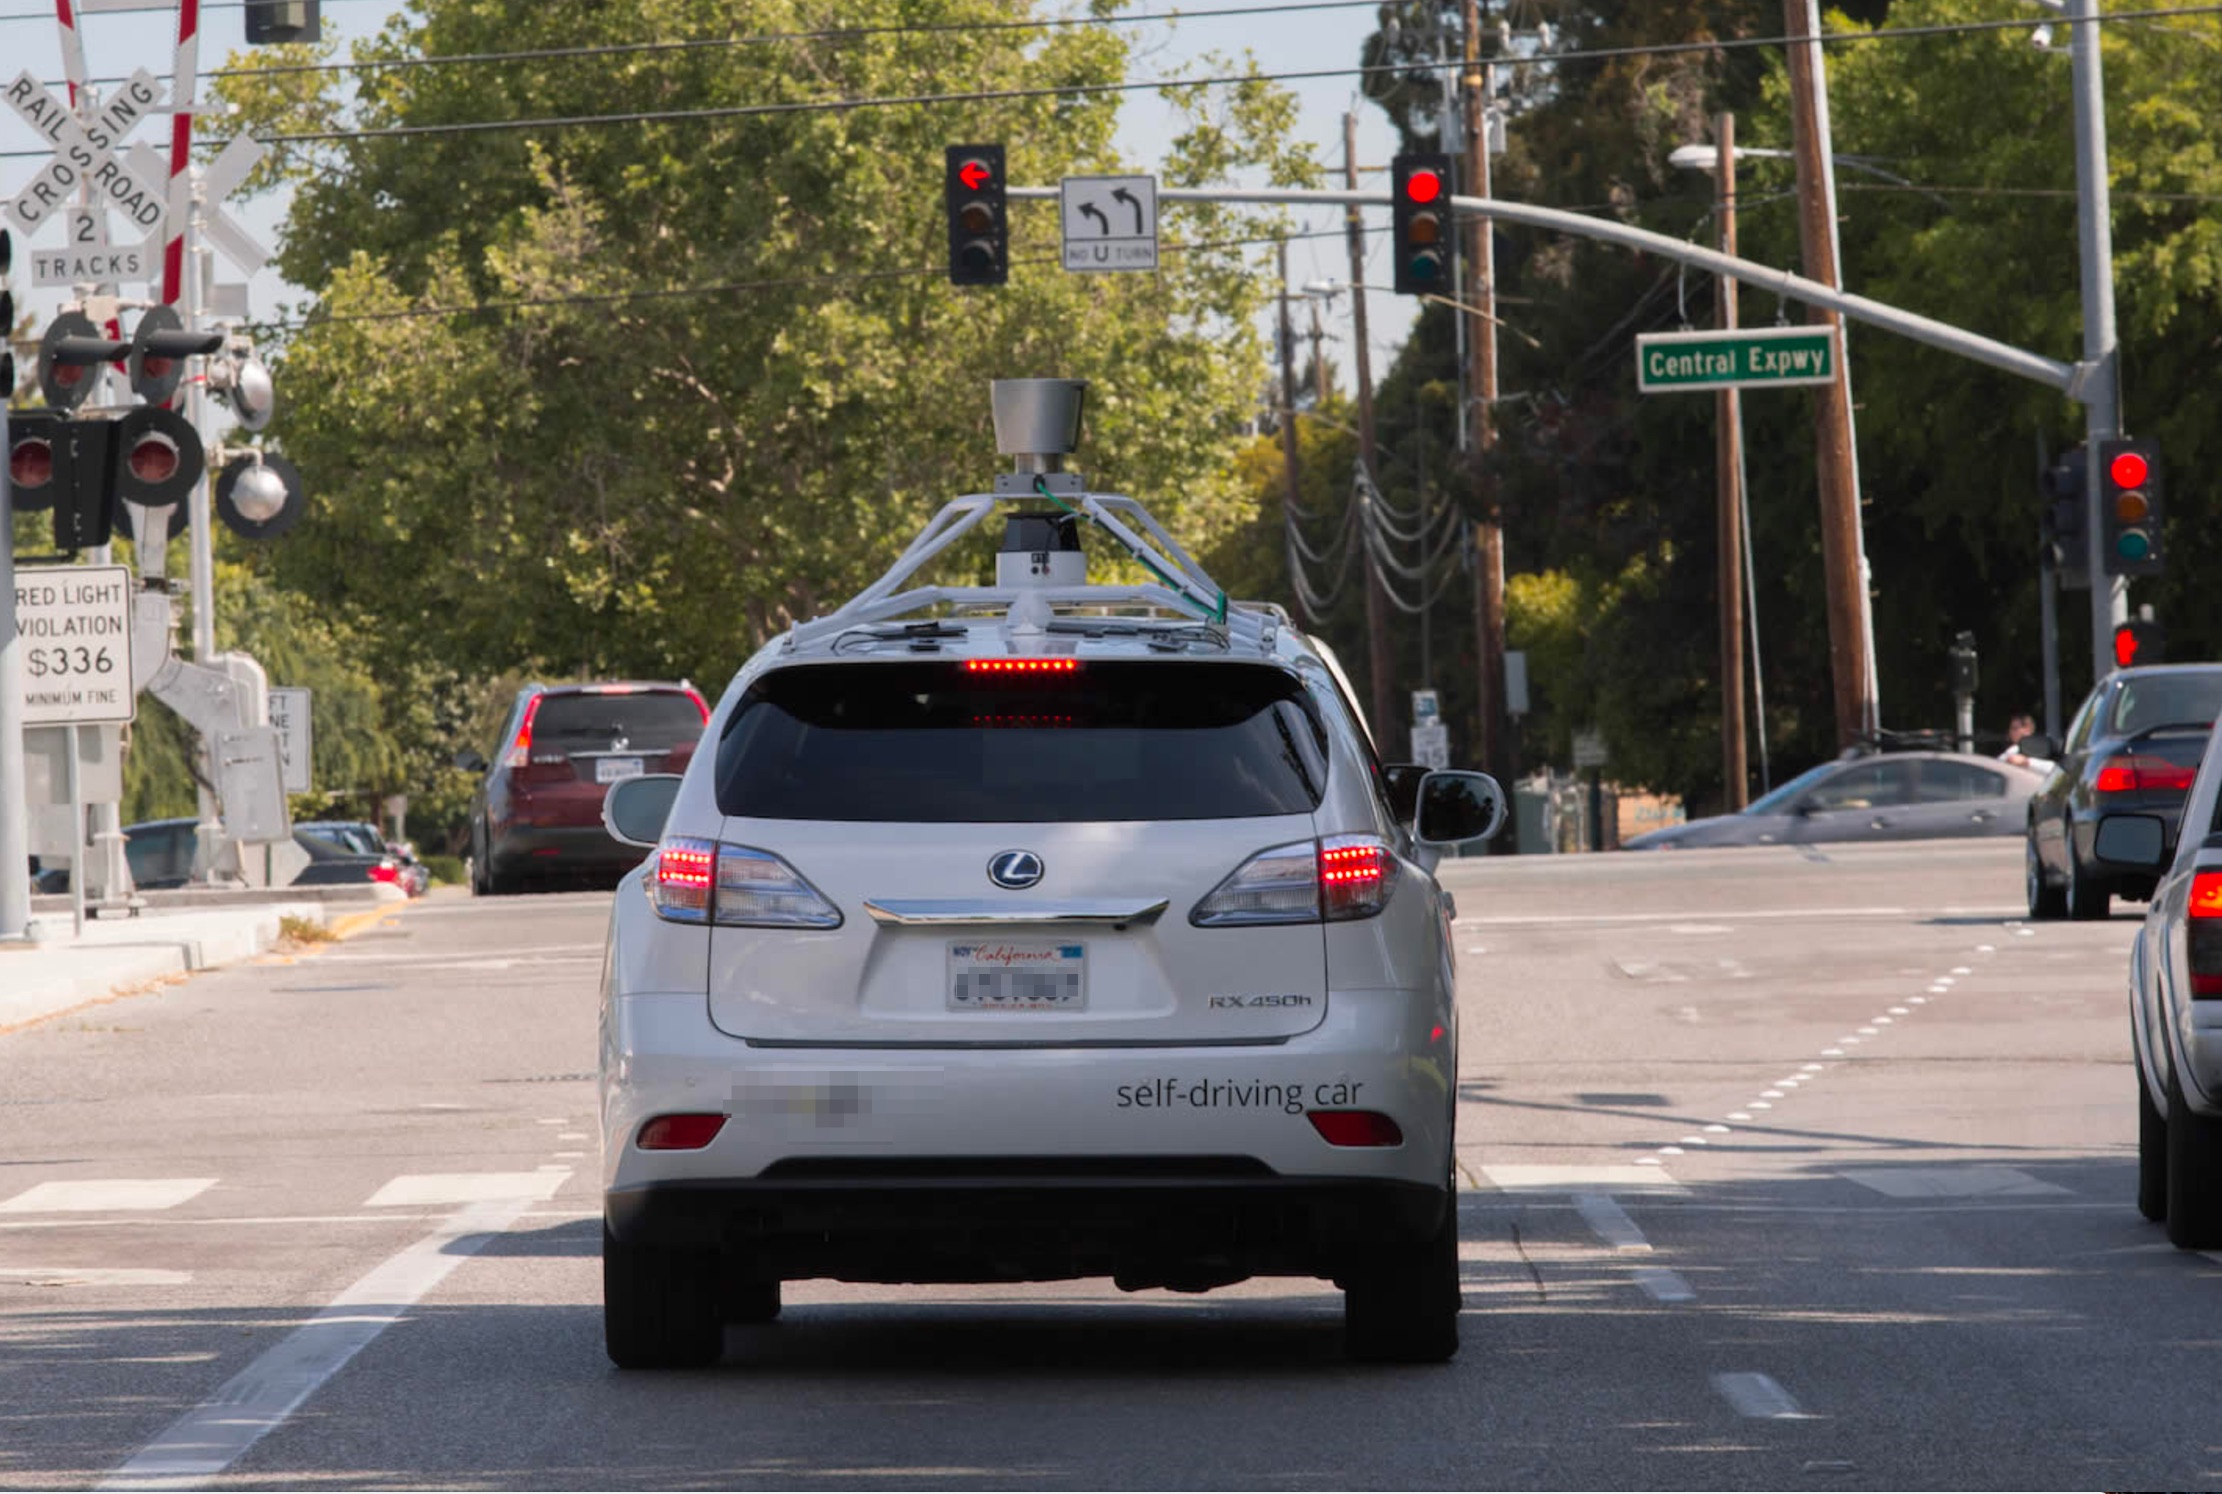 apple approved test self driving car california streets